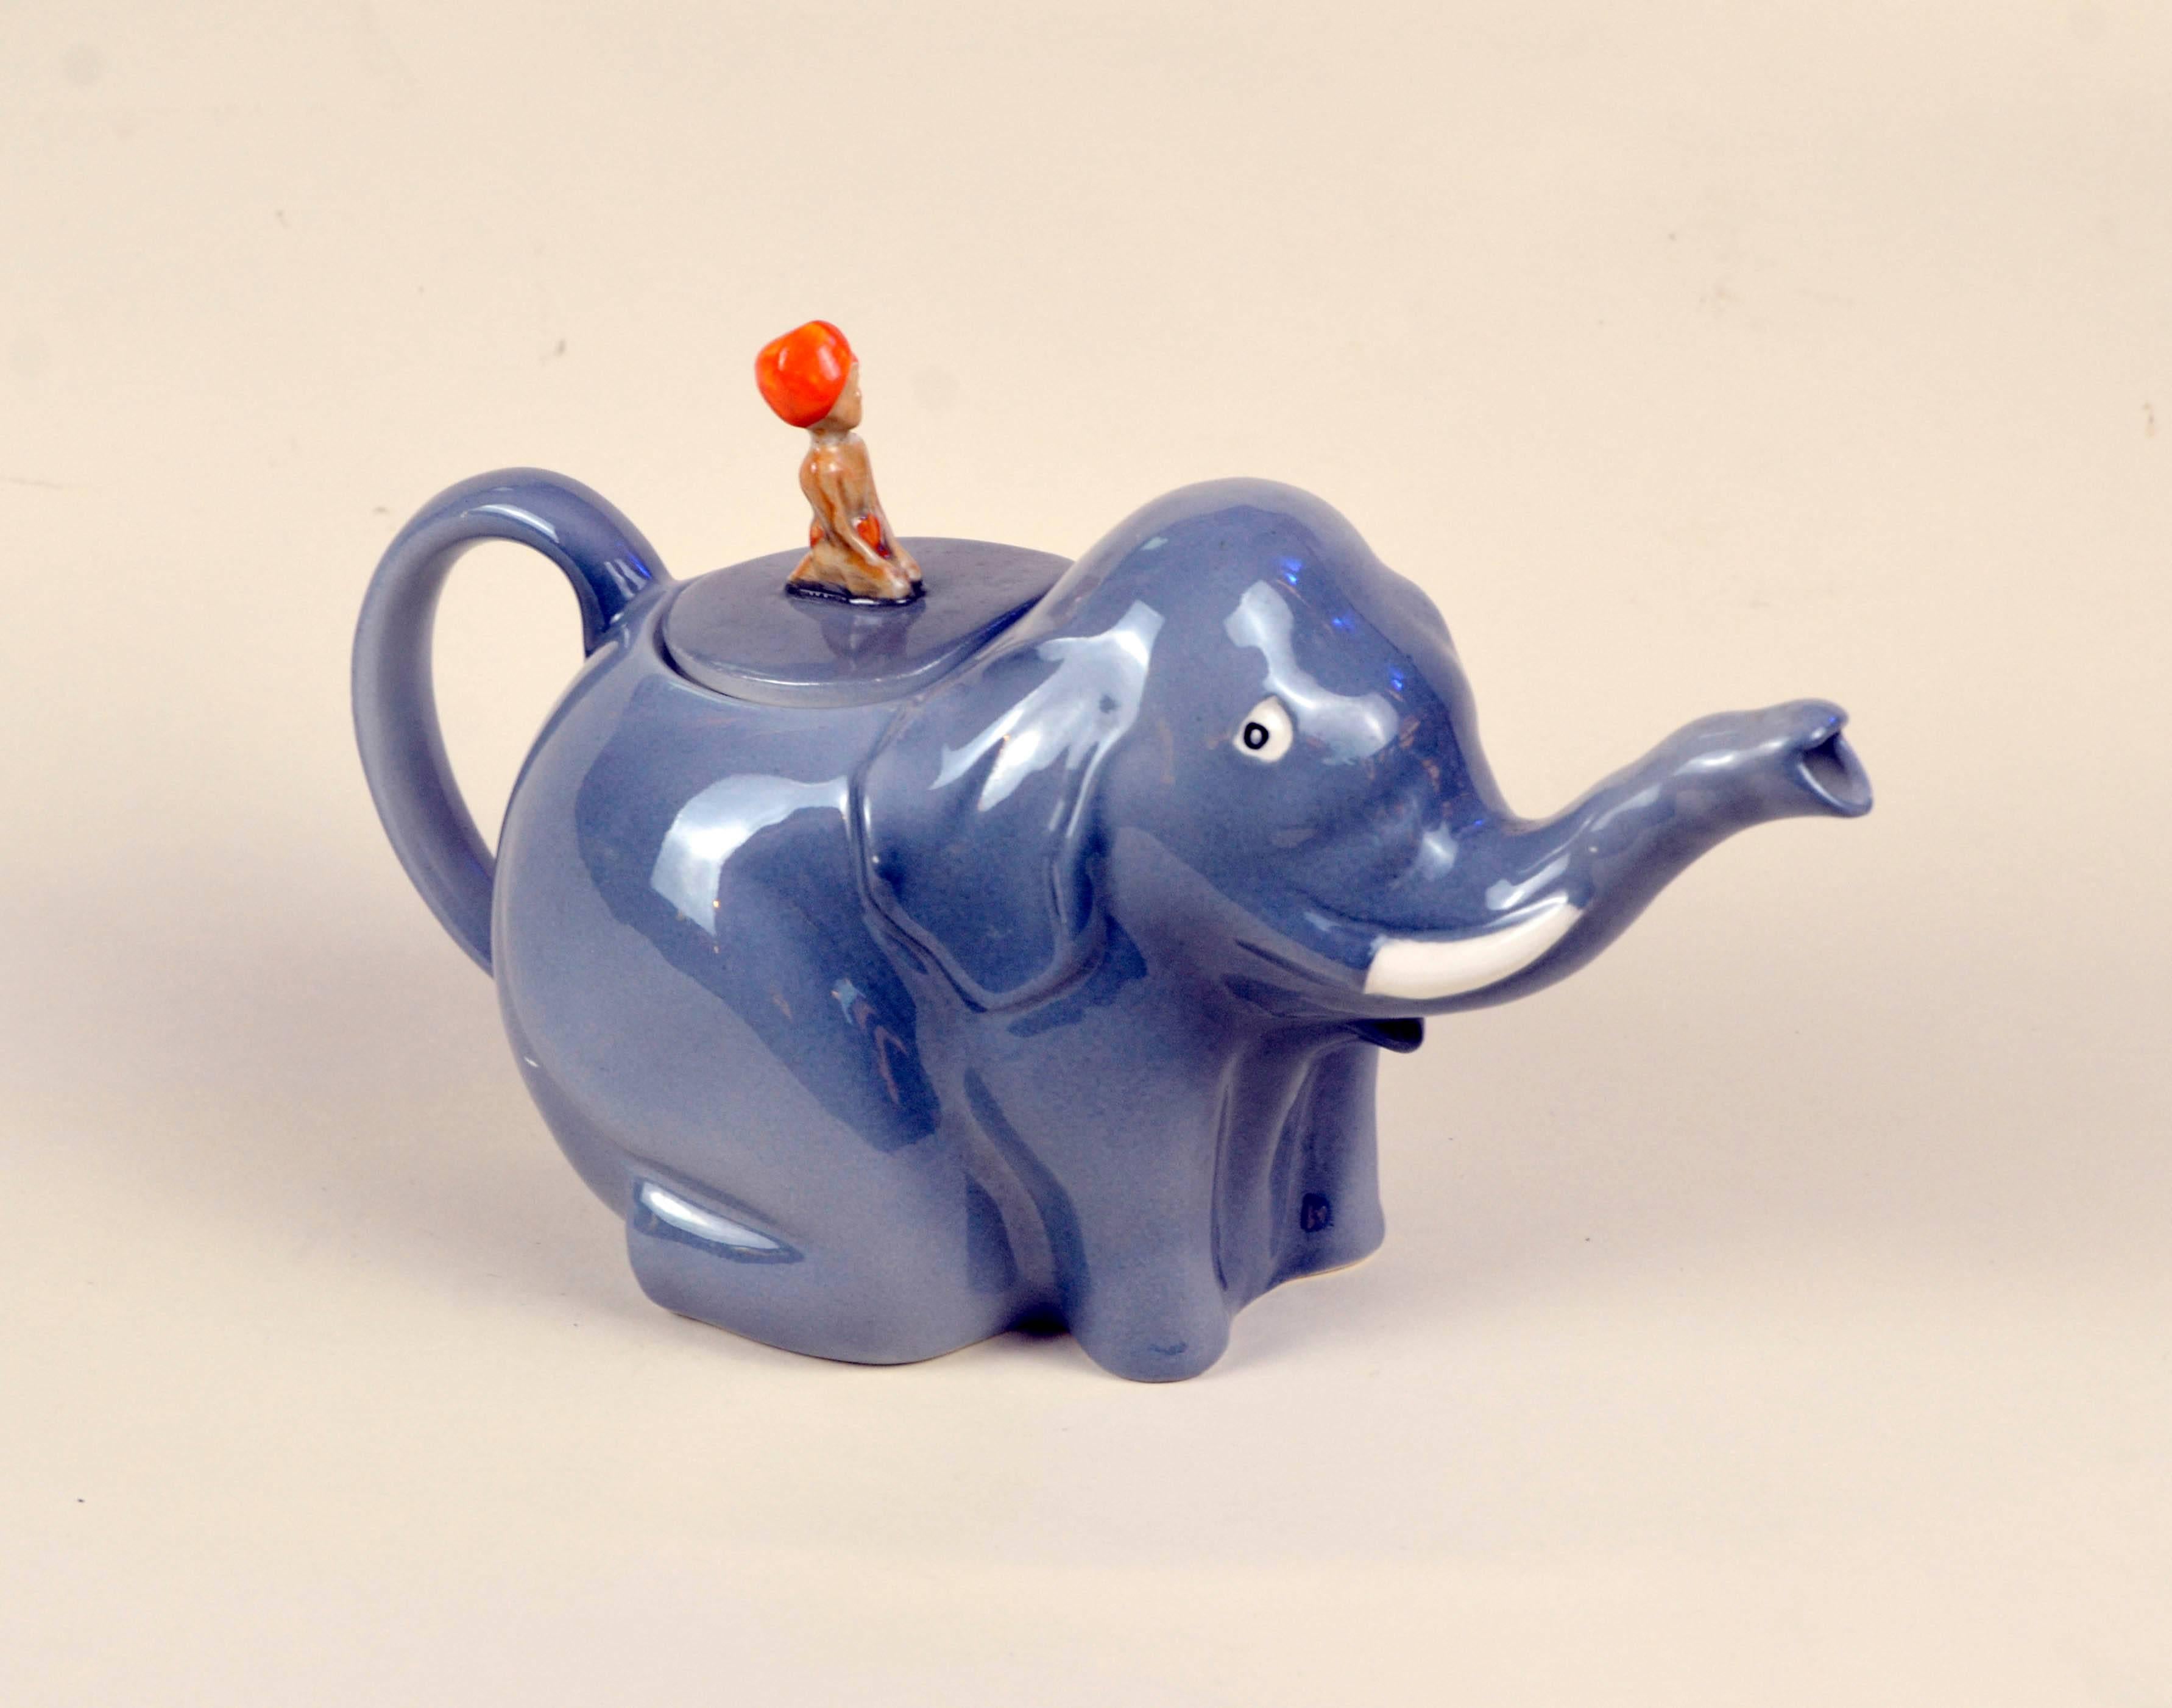 Rare Colclough China elephant teapot. It comes in the rare and popular 